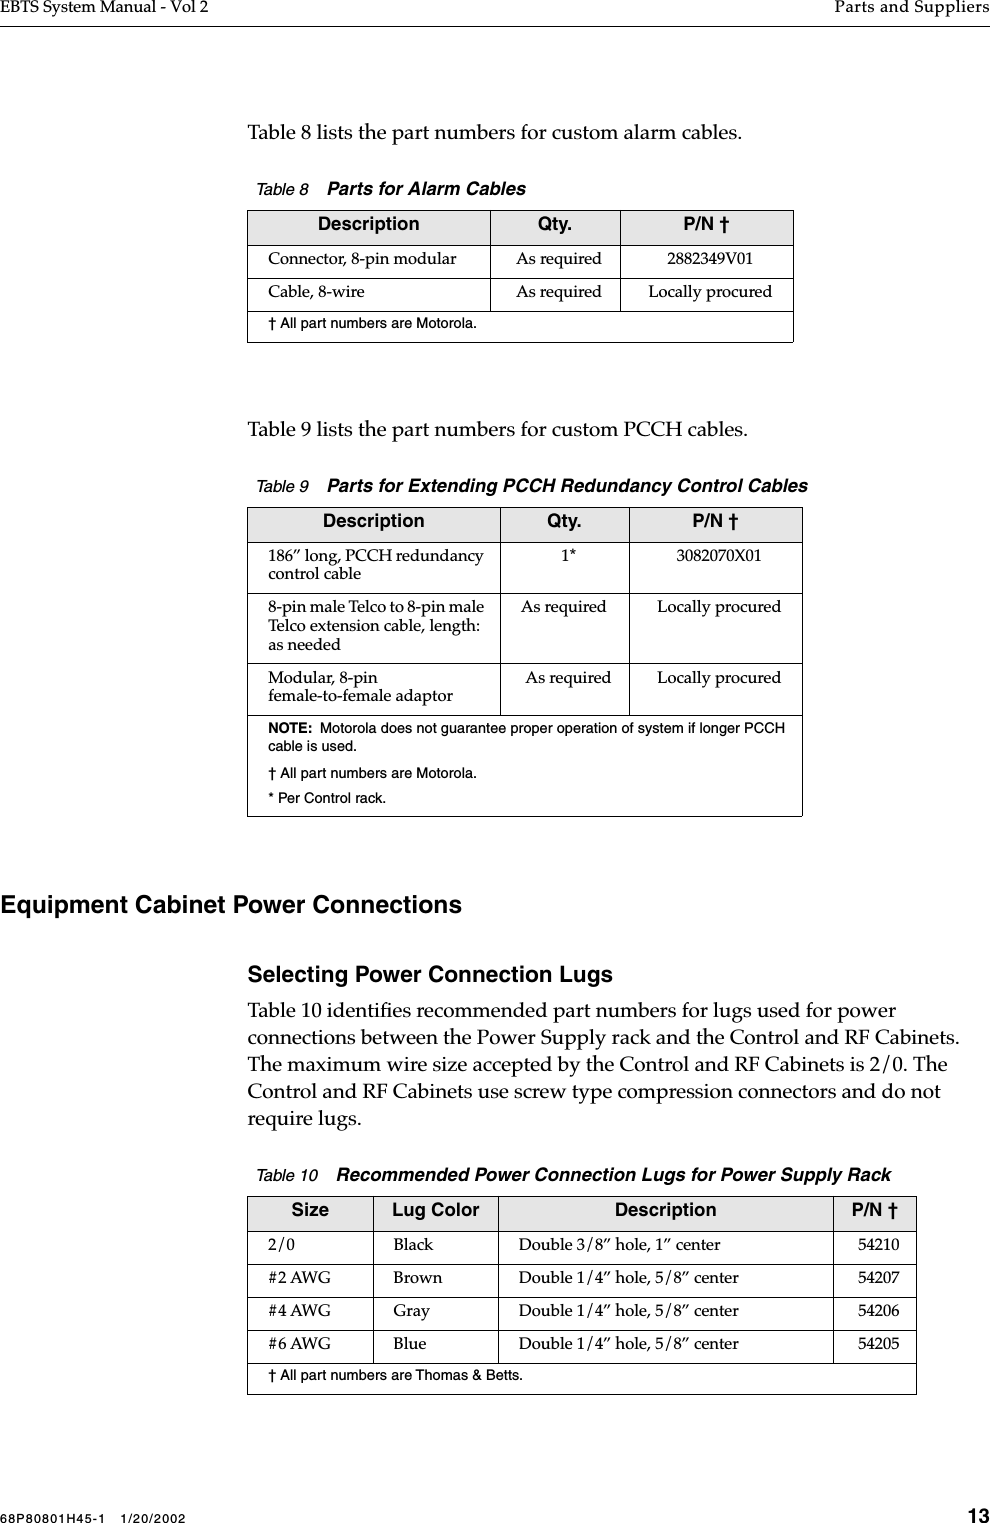 68P80801H45-1   1/20/2002 13EBTS System Manual - Vol 2 Parts and Suppliers Table 8 lists the part numbers for custom alarm cables.Table 9 lists the part numbers for custom PCCH cables.Equipment Cabinet Power ConnectionsSelecting Power Connection LugsTable 10 identiﬁes recommended part numbers for lugs used for power connections between the Power Supply rack and the Control and RF Cabinets. The maximum wire size accepted by the Control and RF Cabinets is 2/0. The Control and RF Cabinets use screw type compression connectors and do not require lugs.Table 8    Parts for Alarm CablesDescription Qty. P/N †Connector, 8-pin modular As required 2882349V01Cable, 8-wire As required Locally procured† All part numbers are Motorola.Table 9    Parts for Extending PCCH Redundancy Control CablesDescription Qty. P/N †186” long, PCCH redundancy control cable1* 3082070X018-pin male Telco to 8-pin male Telco extension cable, length: as neededAs required Locally procuredModular, 8-pin female-to-female adaptorAs required Locally procuredNOTE:  Motorola does not guarantee proper operation of system if longer PCCH cable is used.† All part numbers are Motorola.* Per Control rack.Table 10    Recommended Power Connection Lugs for Power Supply RackSize Lug Color Description P/N †2/0 Black Double 3/8” hole, 1” center 54210#2 AWG Brown Double 1/4” hole, 5/8” center 54207#4 AWG Gray Double 1/4” hole, 5/8” center 54206#6 AWG Blue Double 1/4” hole, 5/8” center 54205† All part numbers are Thomas &amp; Betts.